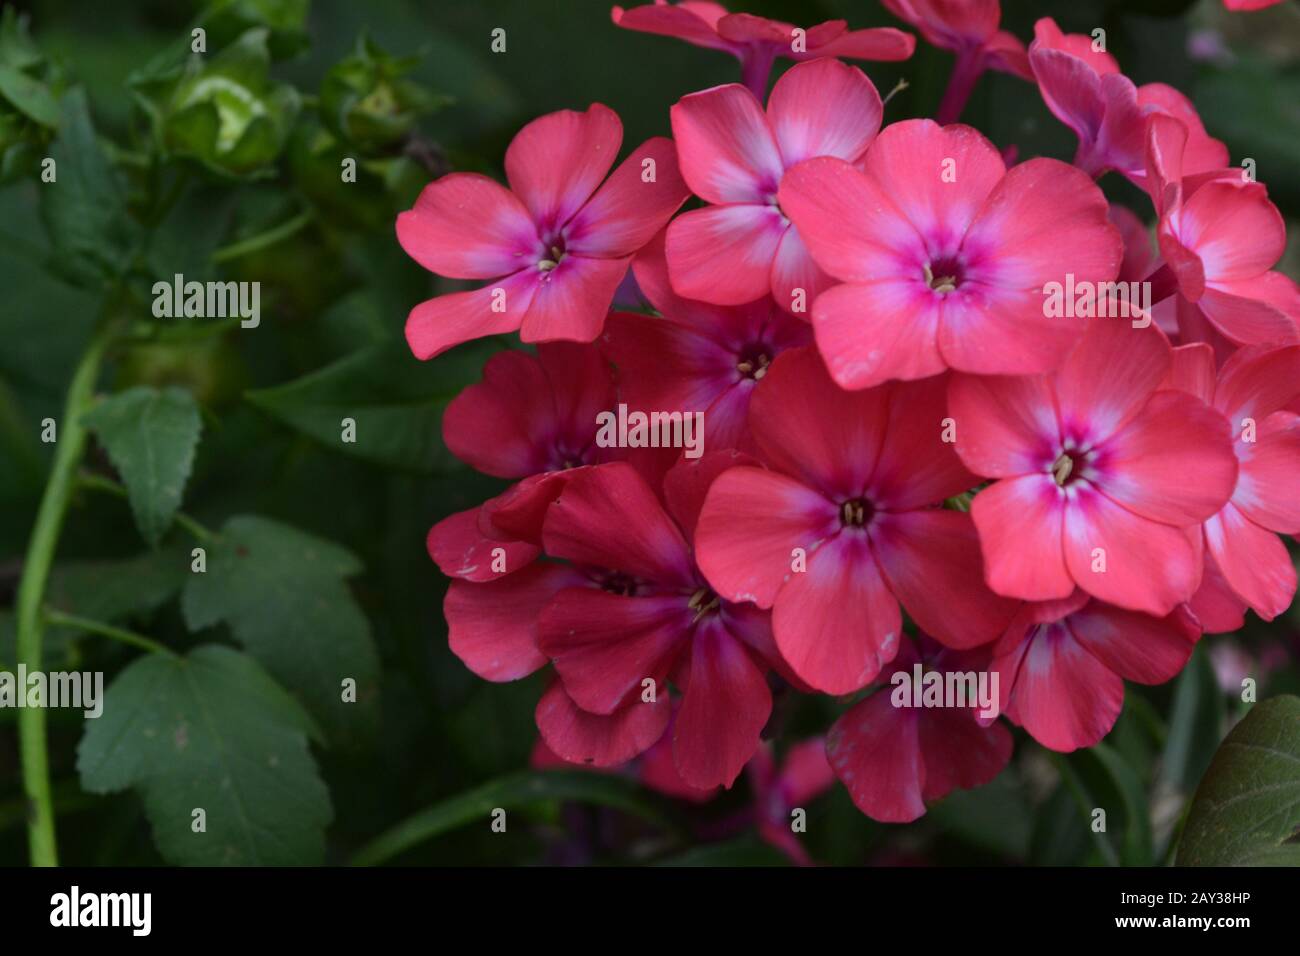 Phlox. Polemoniaceae. Beautiful inflorescence. Flowers pink. Nice smell. Growing flowers. Flowerbed. Garden. Floriculture. Close-up. Horizontal photo Stock Photo